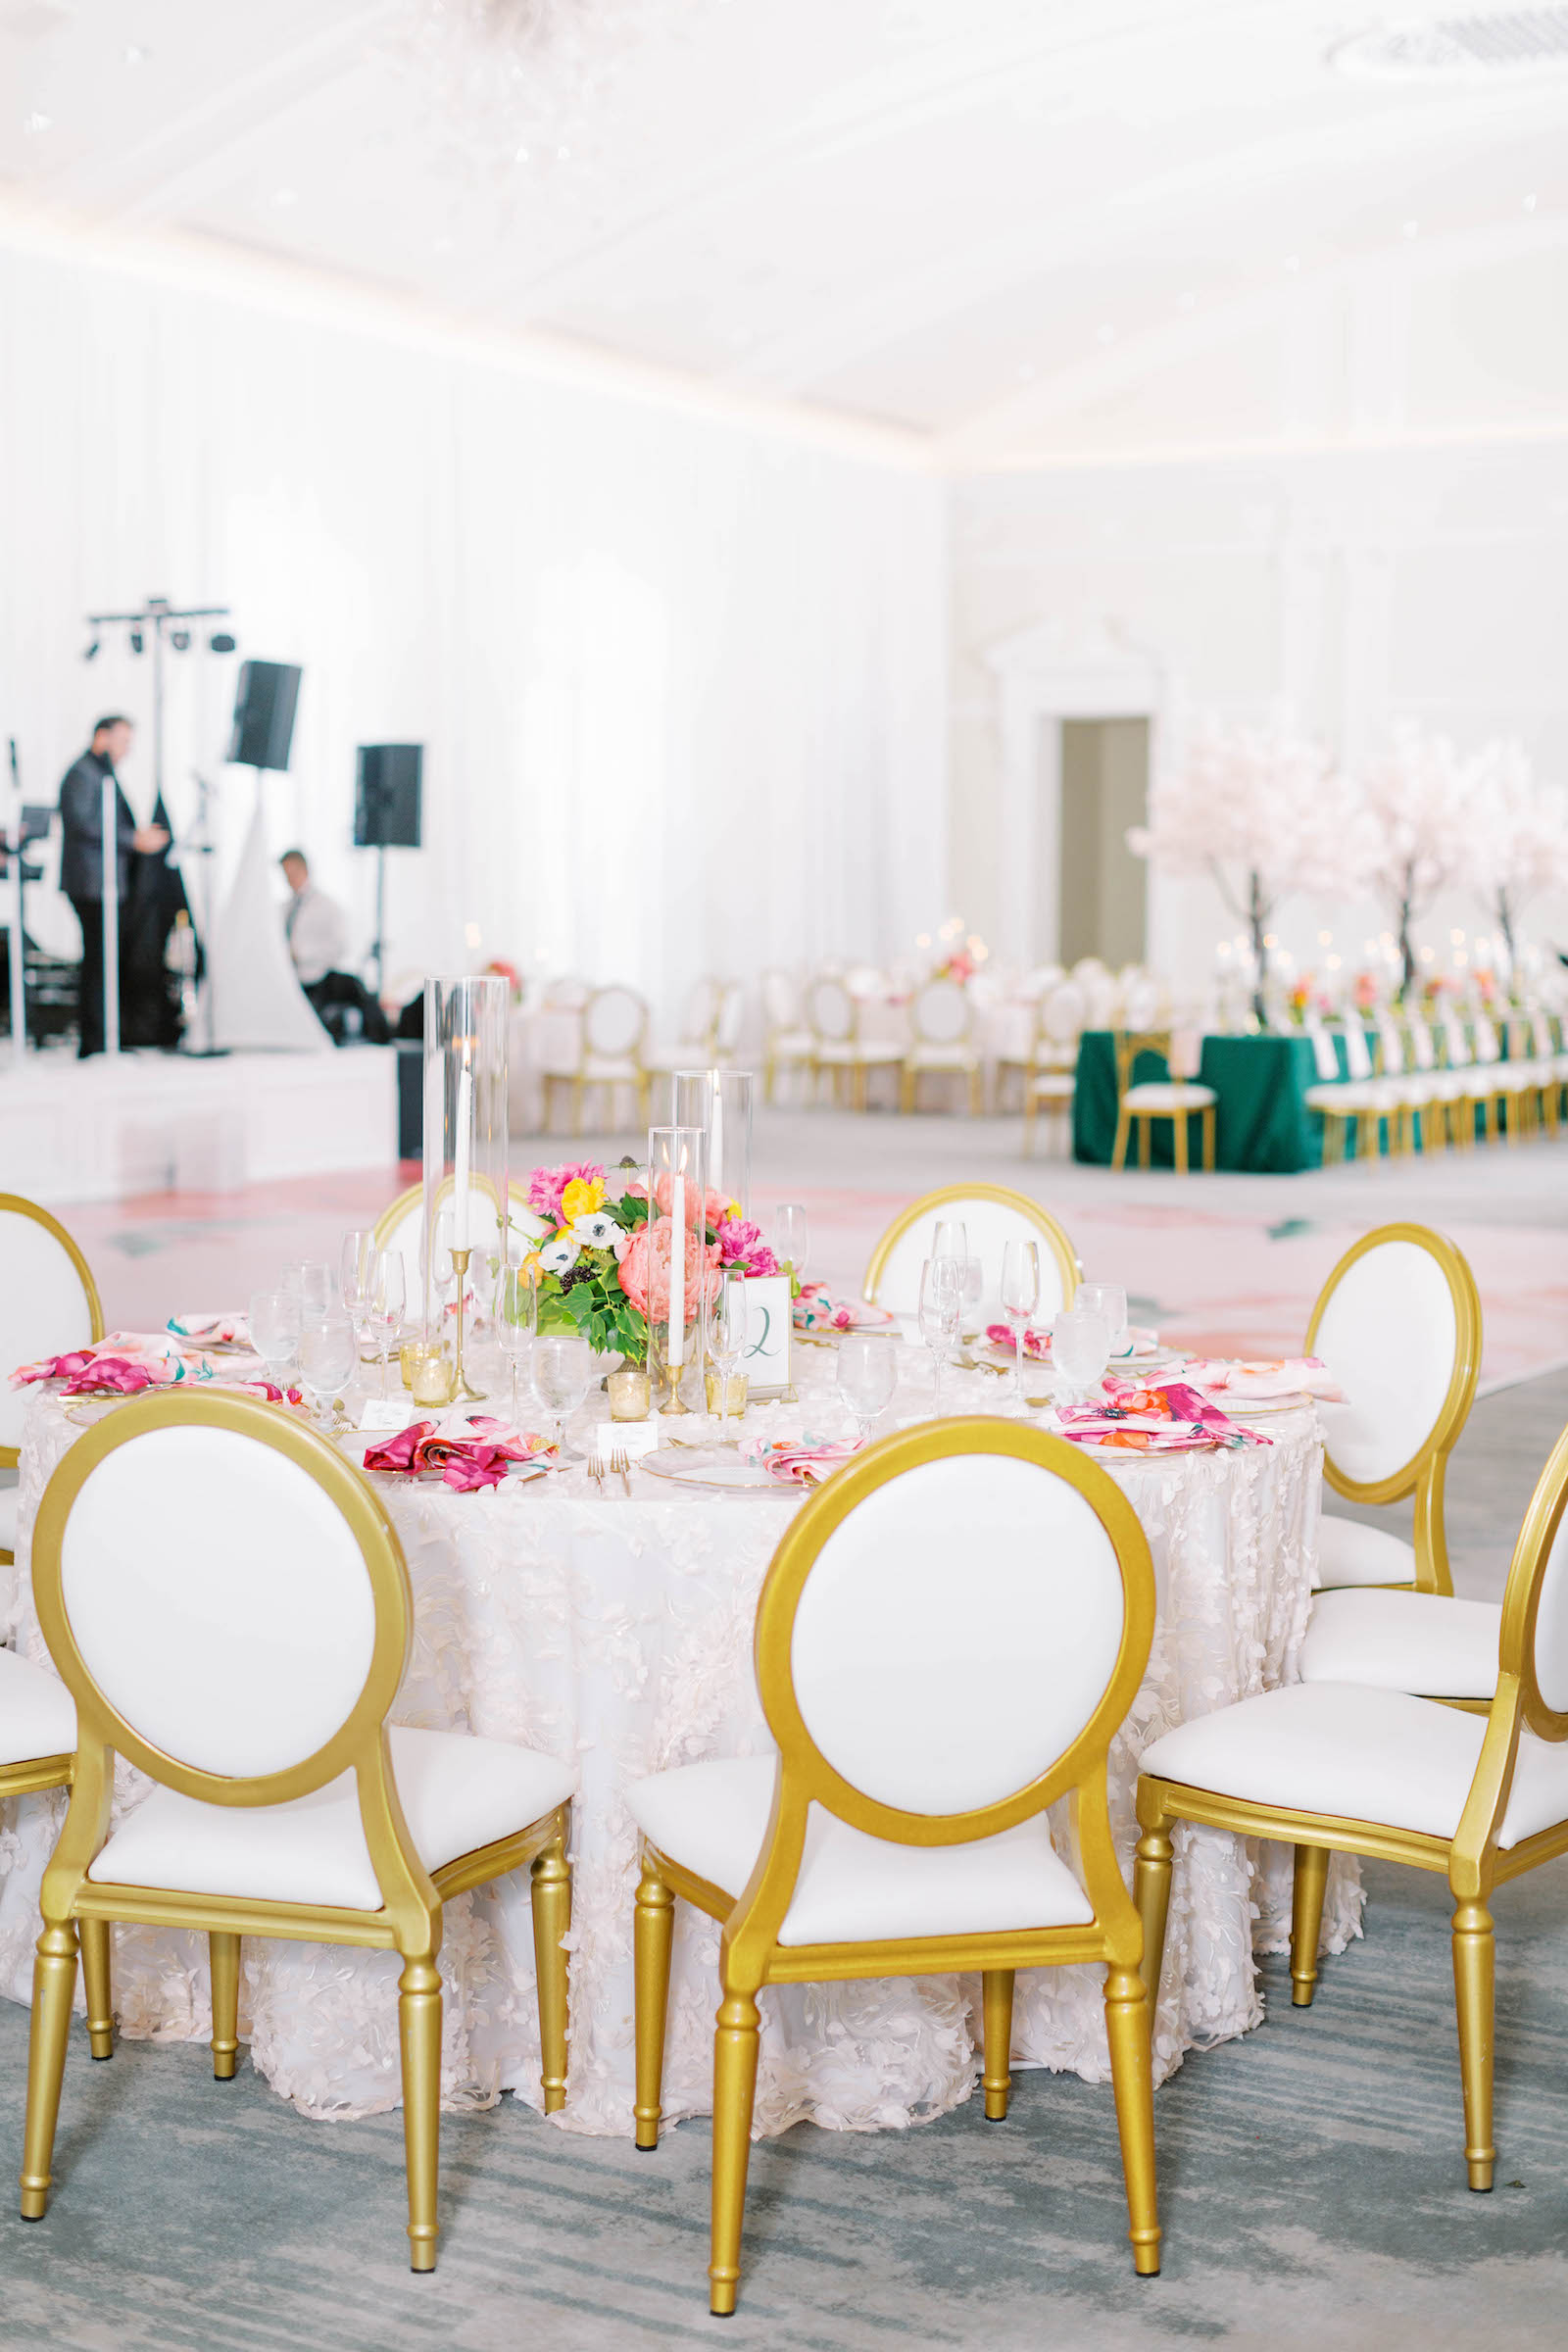 White and Gold Chairs at Wedding Reception with Hot Pink Accents